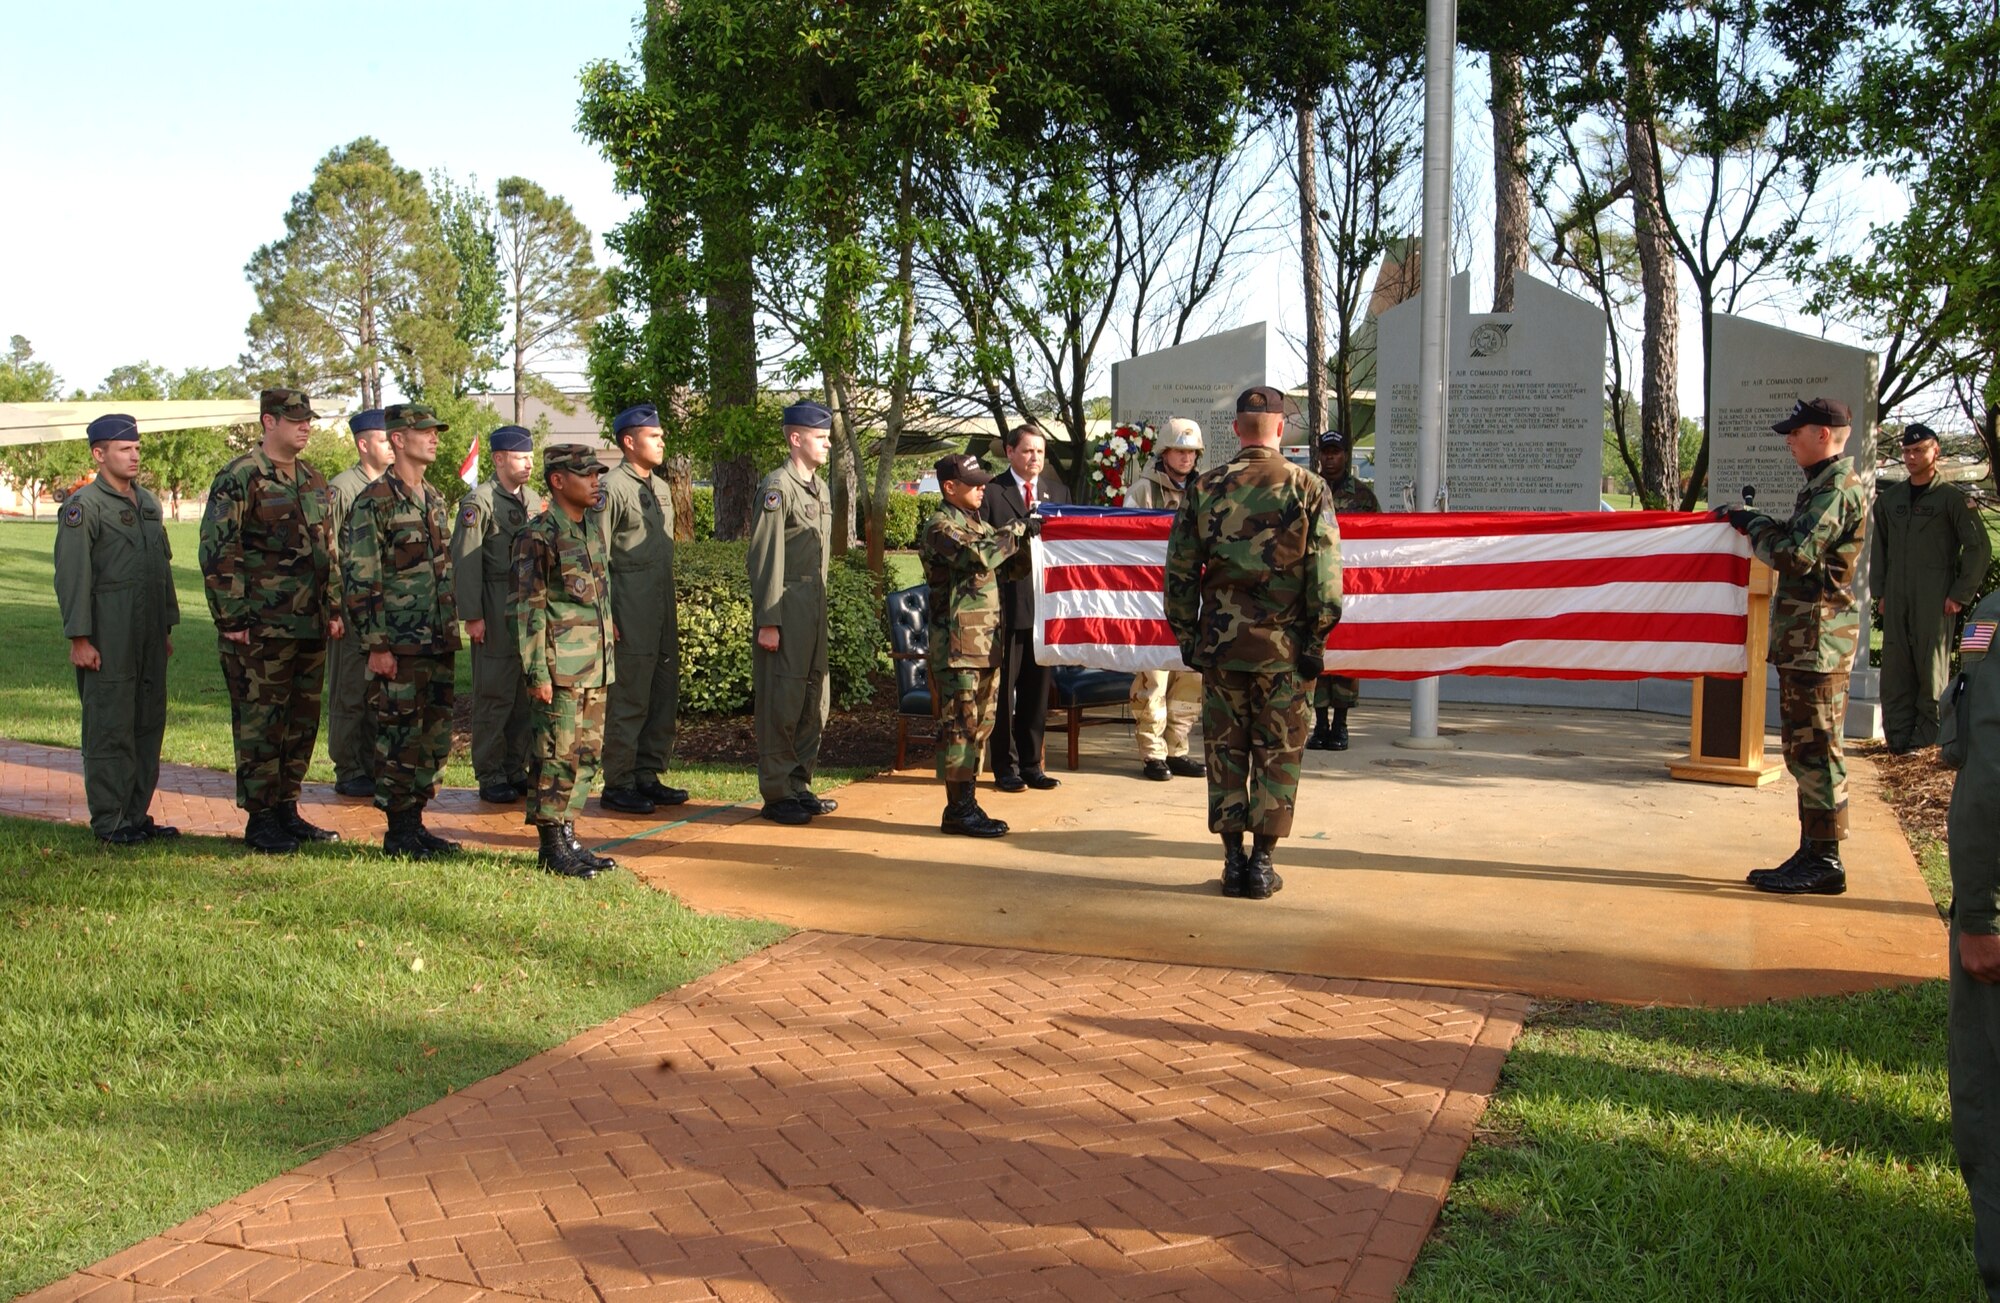 Airmen from the Hurlburt Field Honor guard prepare to retire the colors at a retreat ceremony April 28 in honor of those who lost their lives in Desert One while trying to rescue 52 American hostages in Iran 26 years ago.